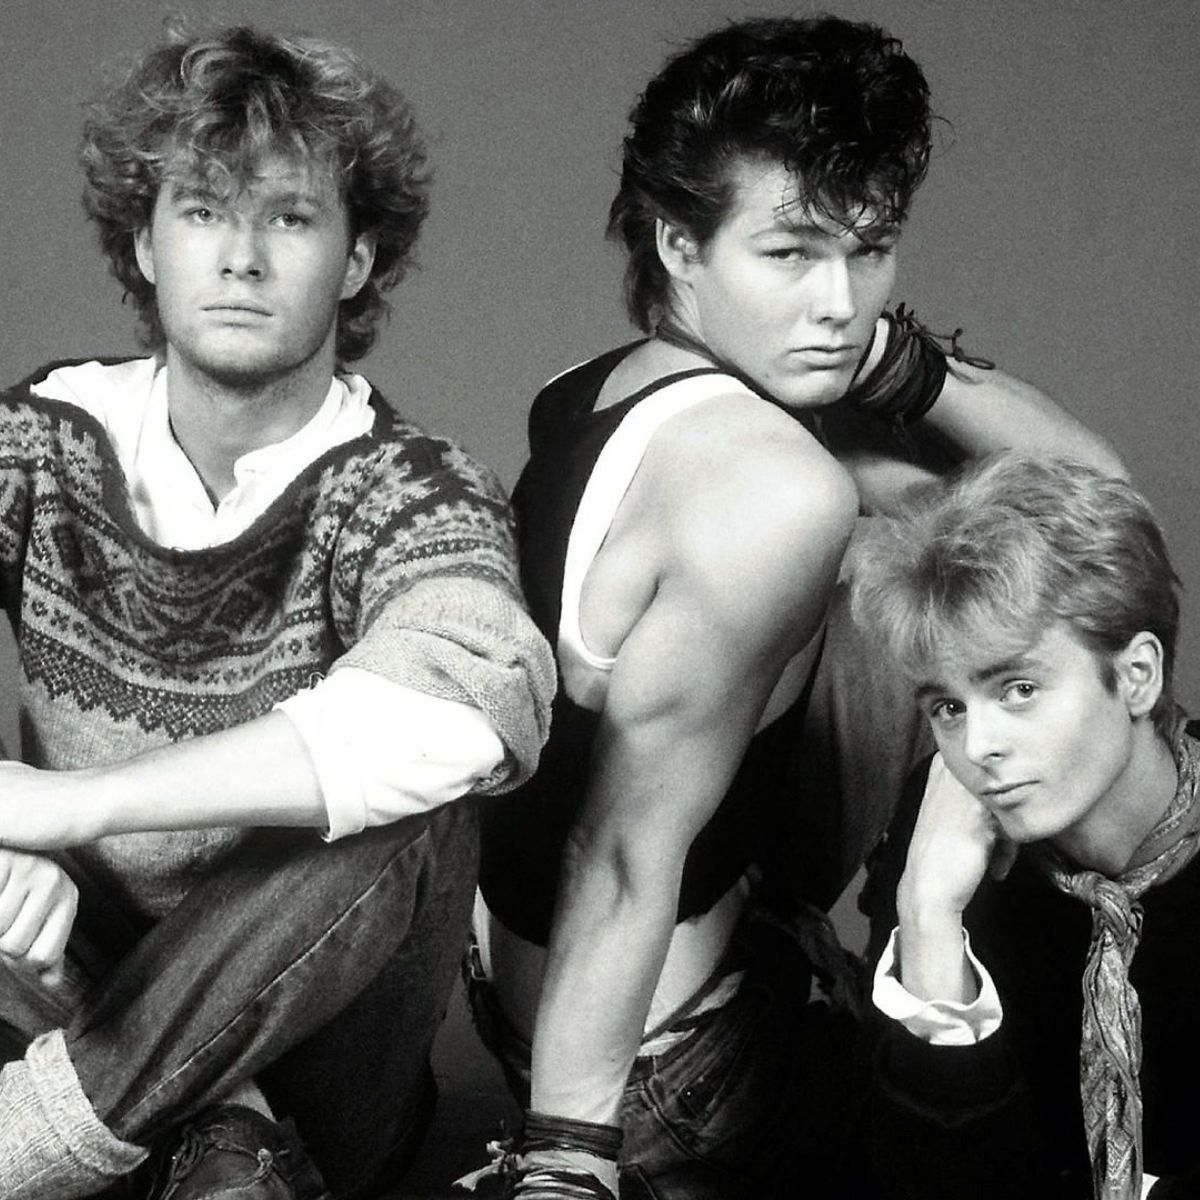 Group "A-ha" in his youth